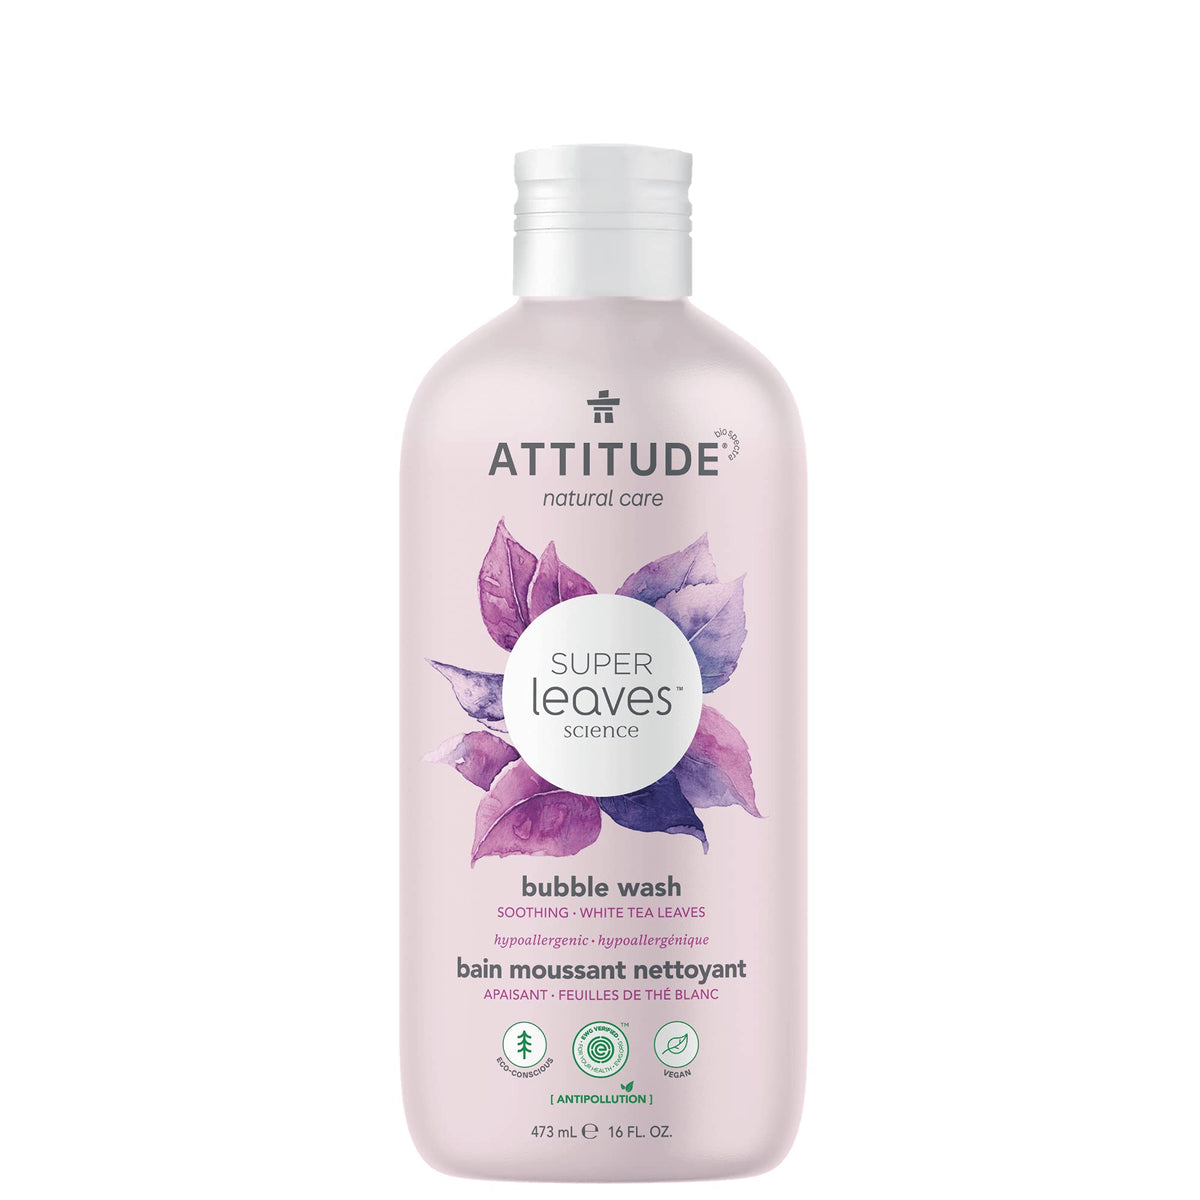 ATTITUDE Bubble Bath, EWG Verified, Plant & Mineral-Based Ingredients, Dermatologist-Tested, Vegan & Cruelty-Free Body Care Products, White Tea Leaves, 473 ml